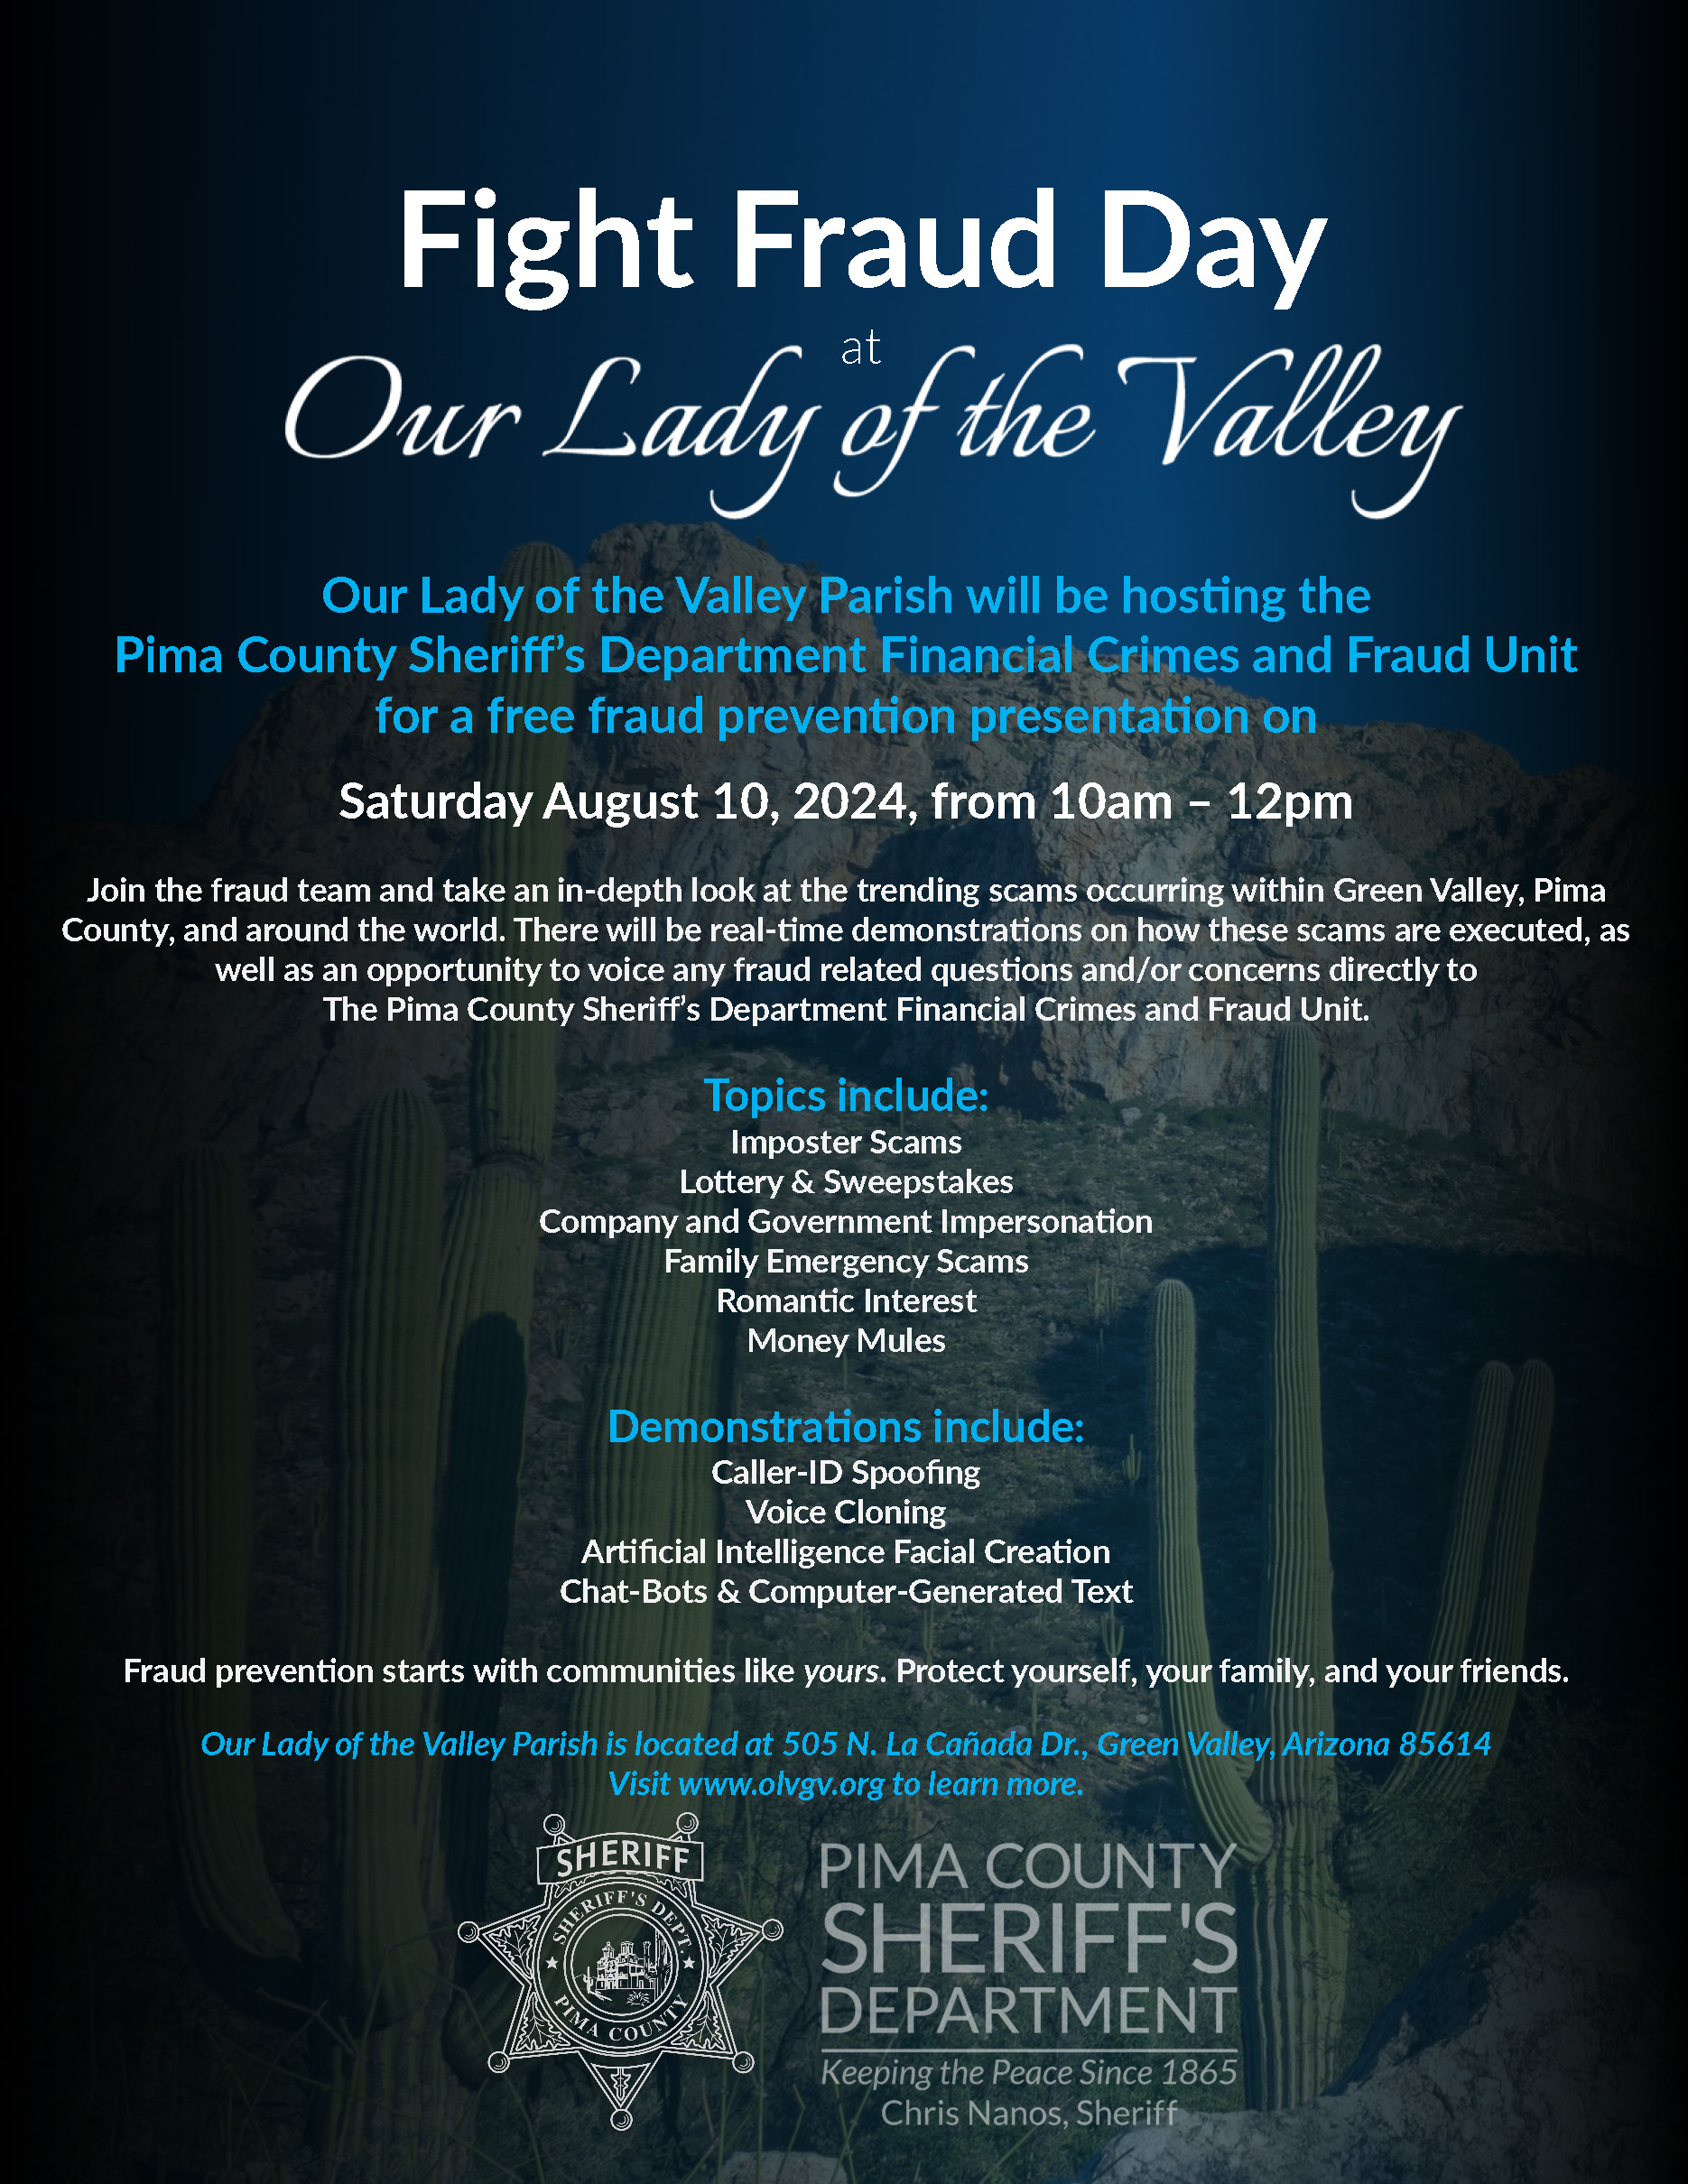 Fight Fraud Day at Our Lady of the Valley Flyer.jpg